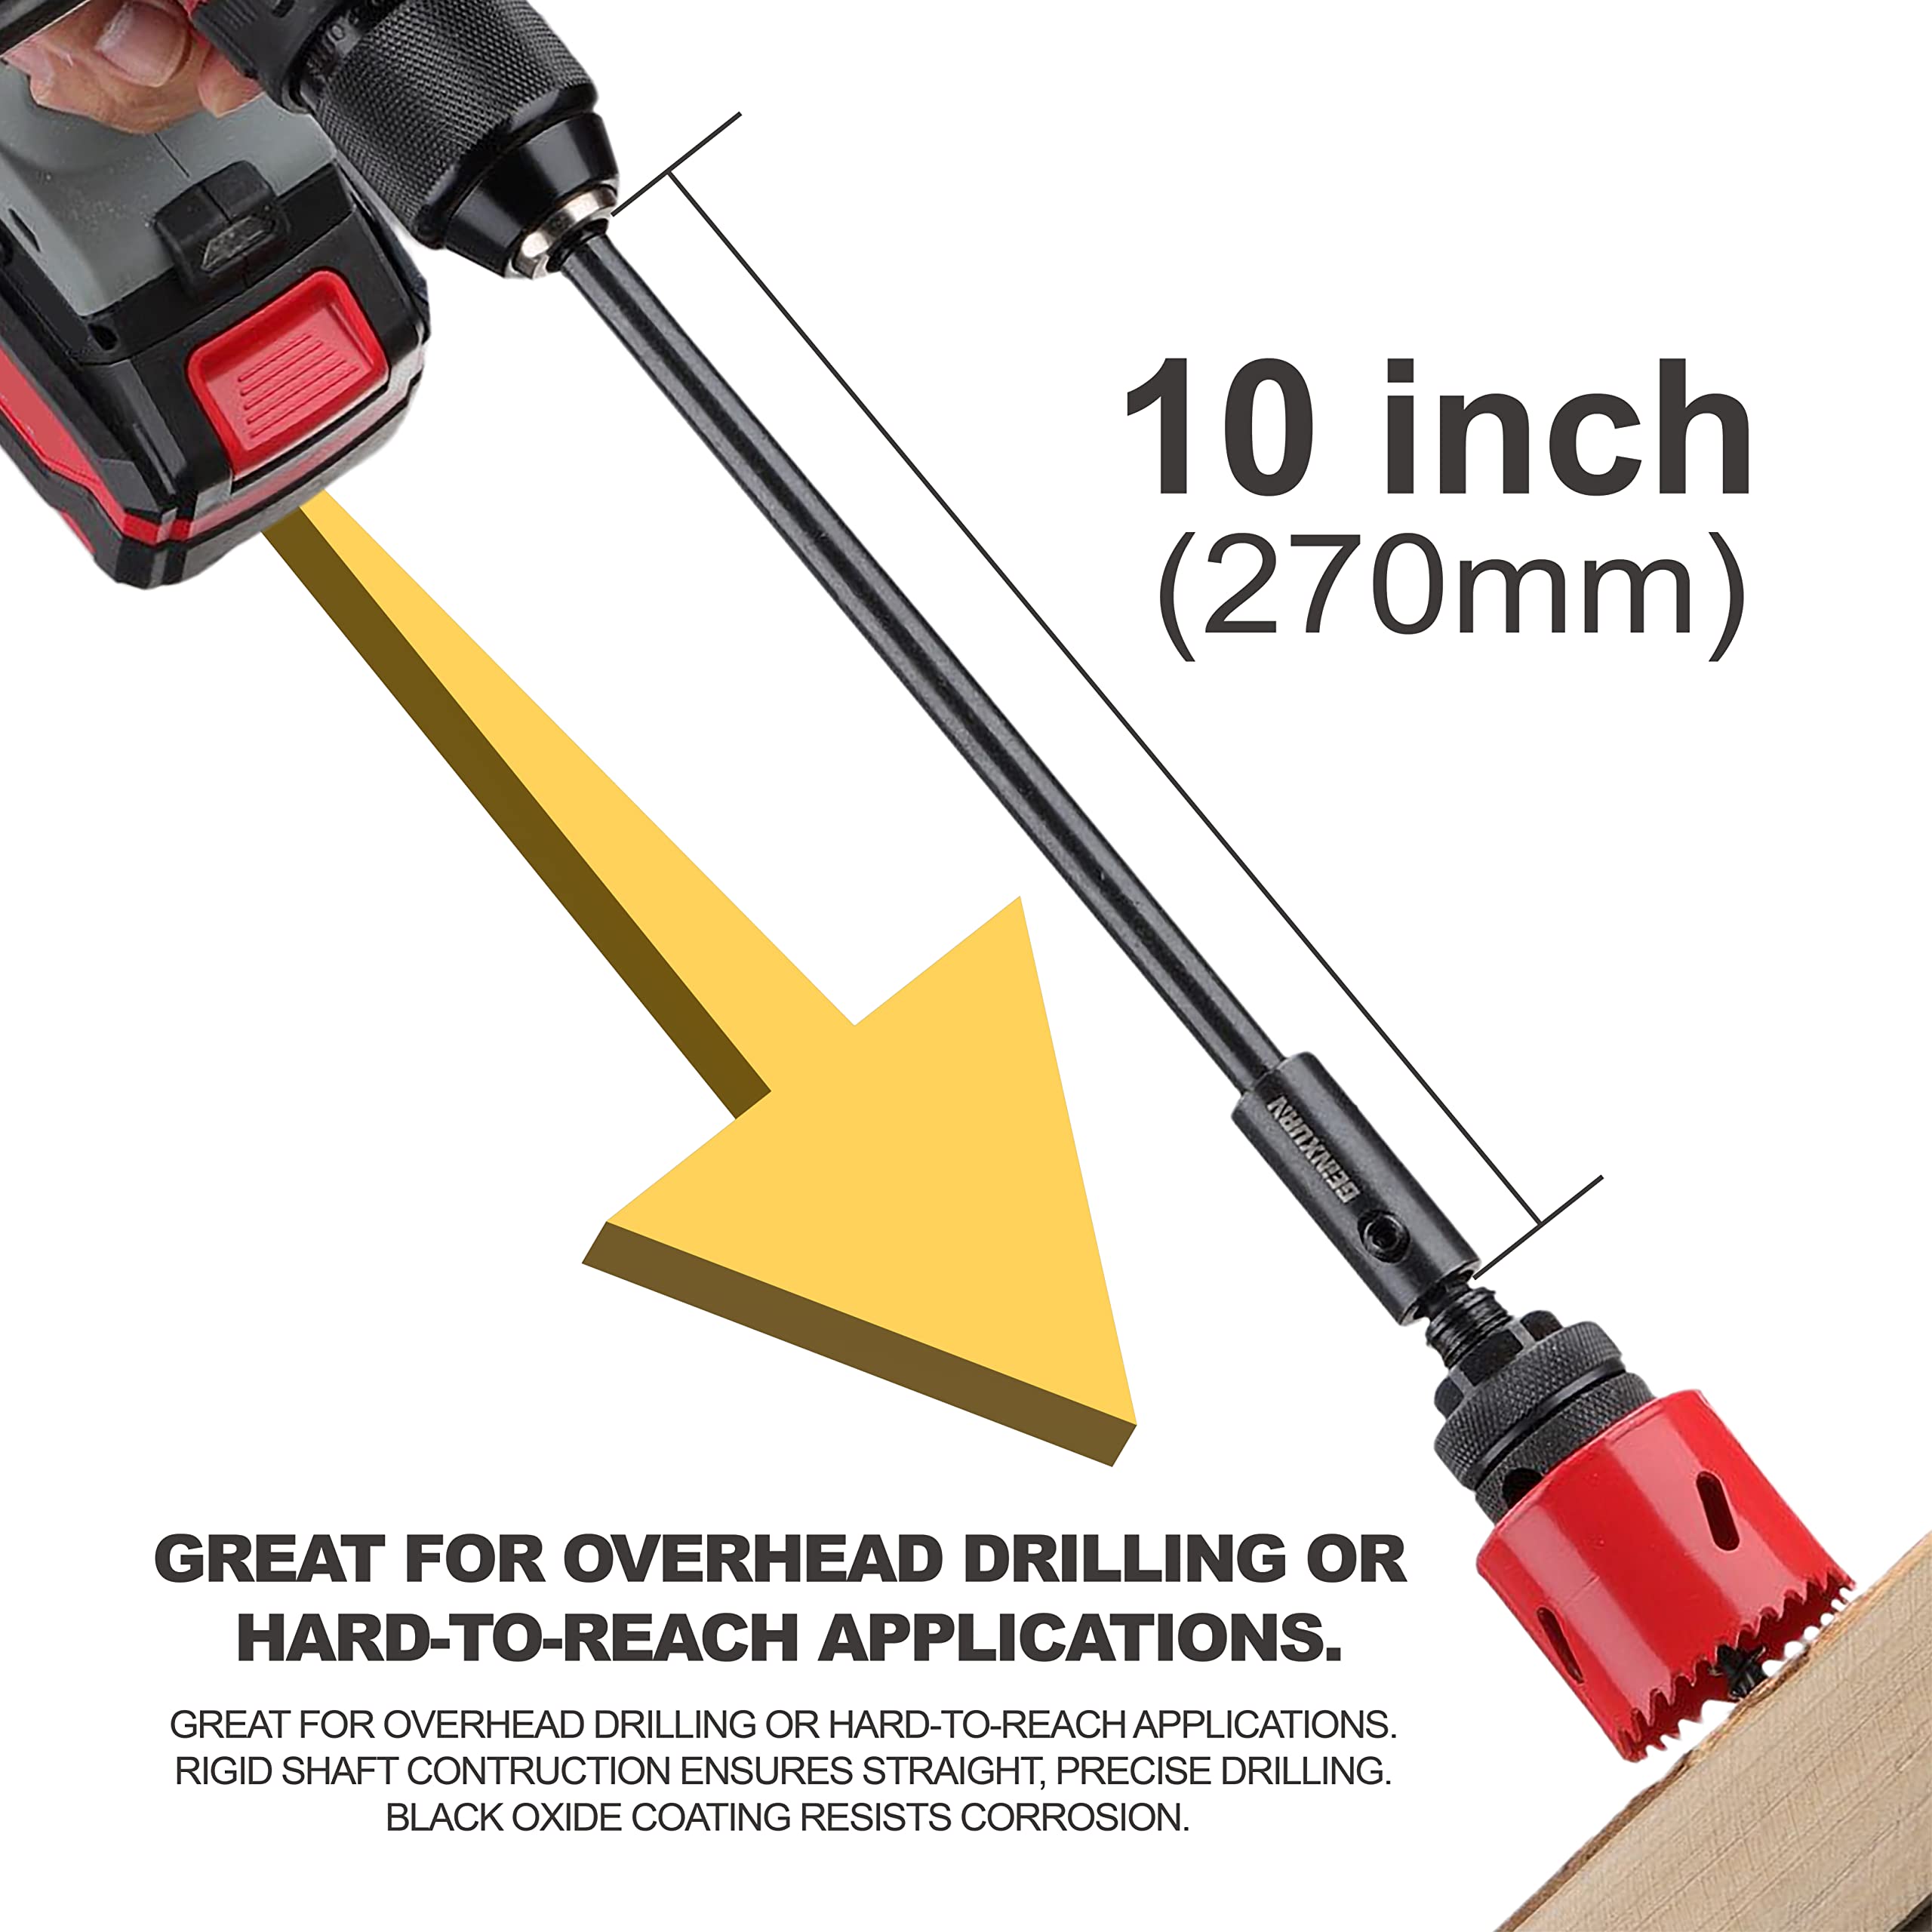 GEINXURN Tools Hole Saw Extension Chuck, 10-Inch x 3/8-Inch Hex Shank Reducing Locking Impact Extension